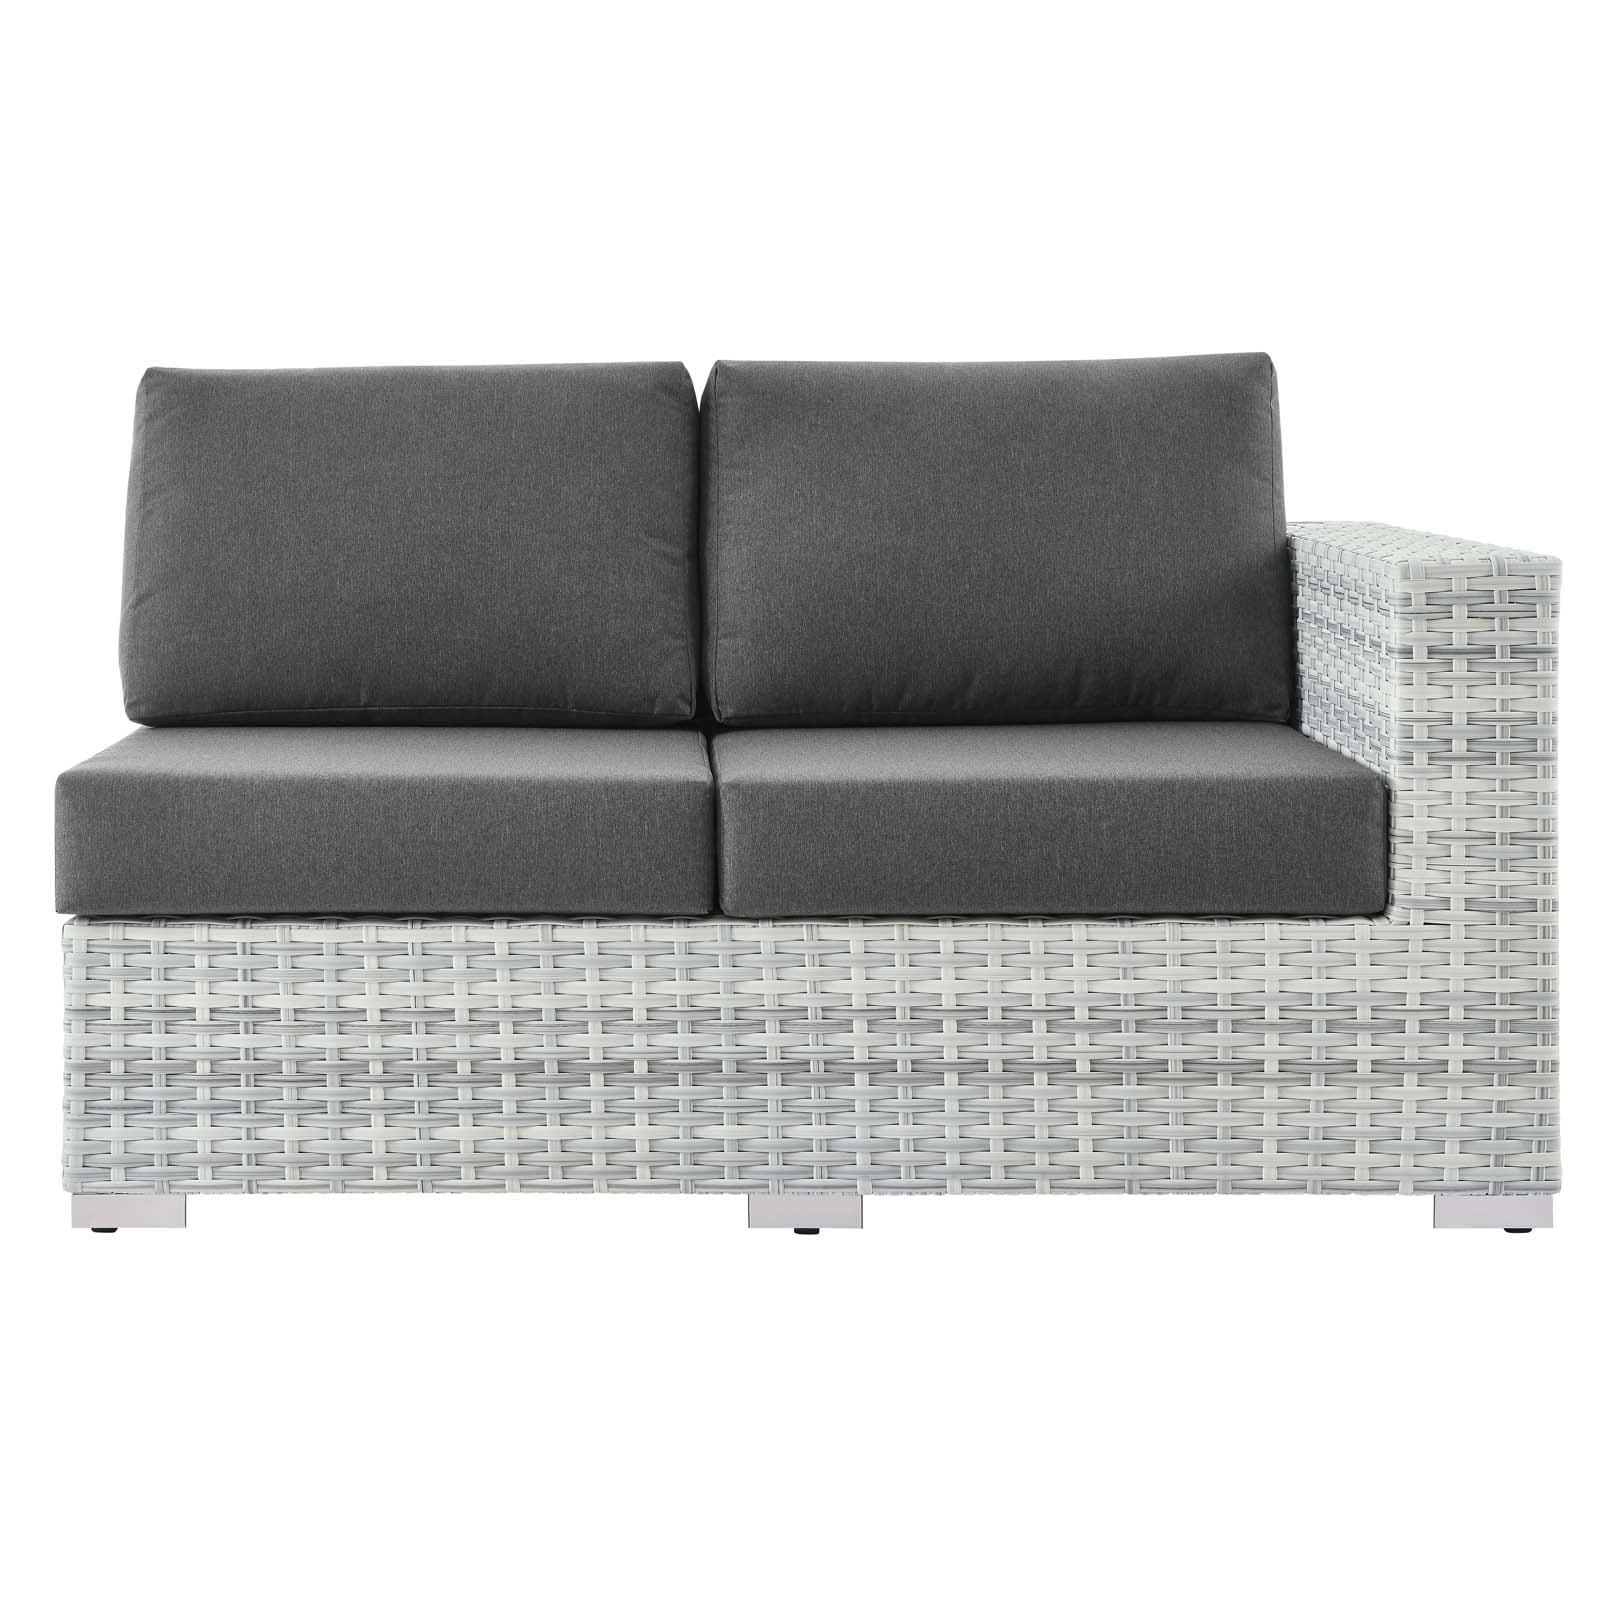 Convene Outdoor Patio Right-Arm Loveseat - East Shore Modern Home Furnishings